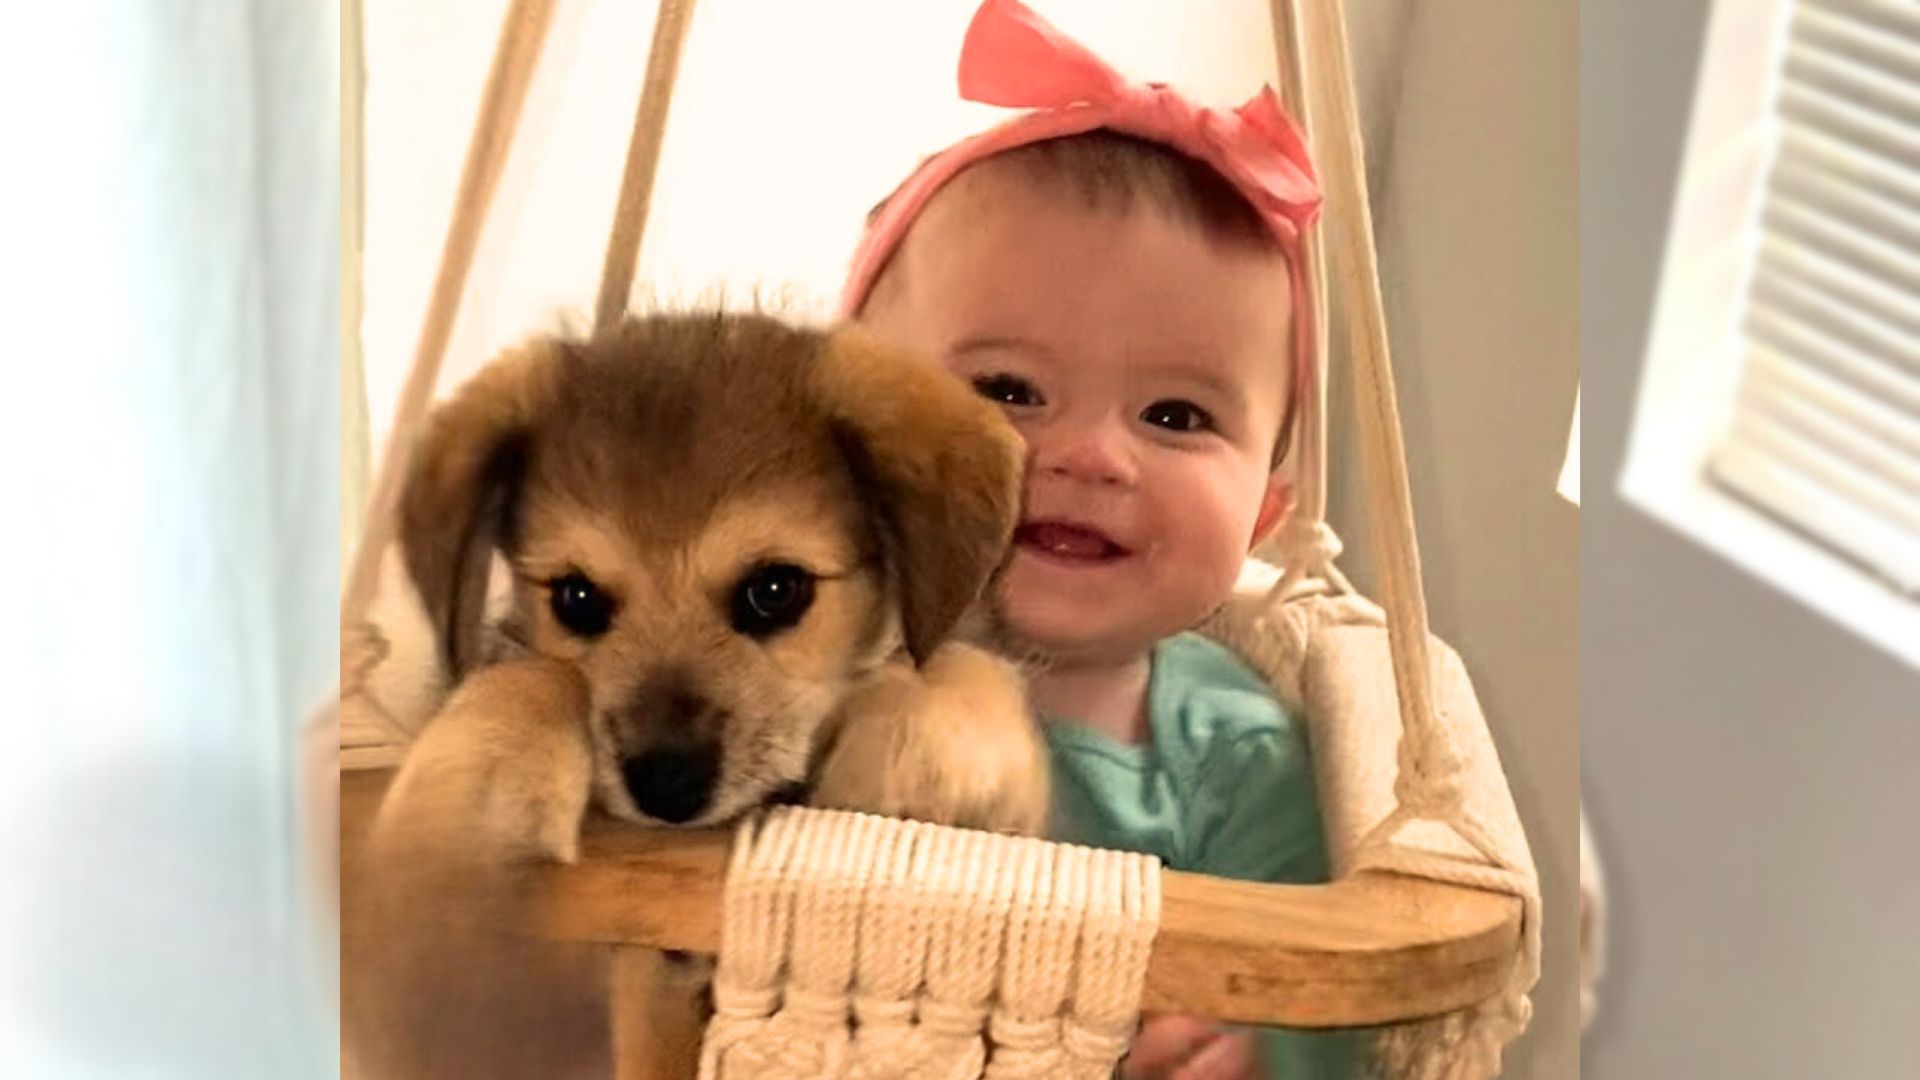 This Baby And Her Dog Babysitter Have A Very Special Bond